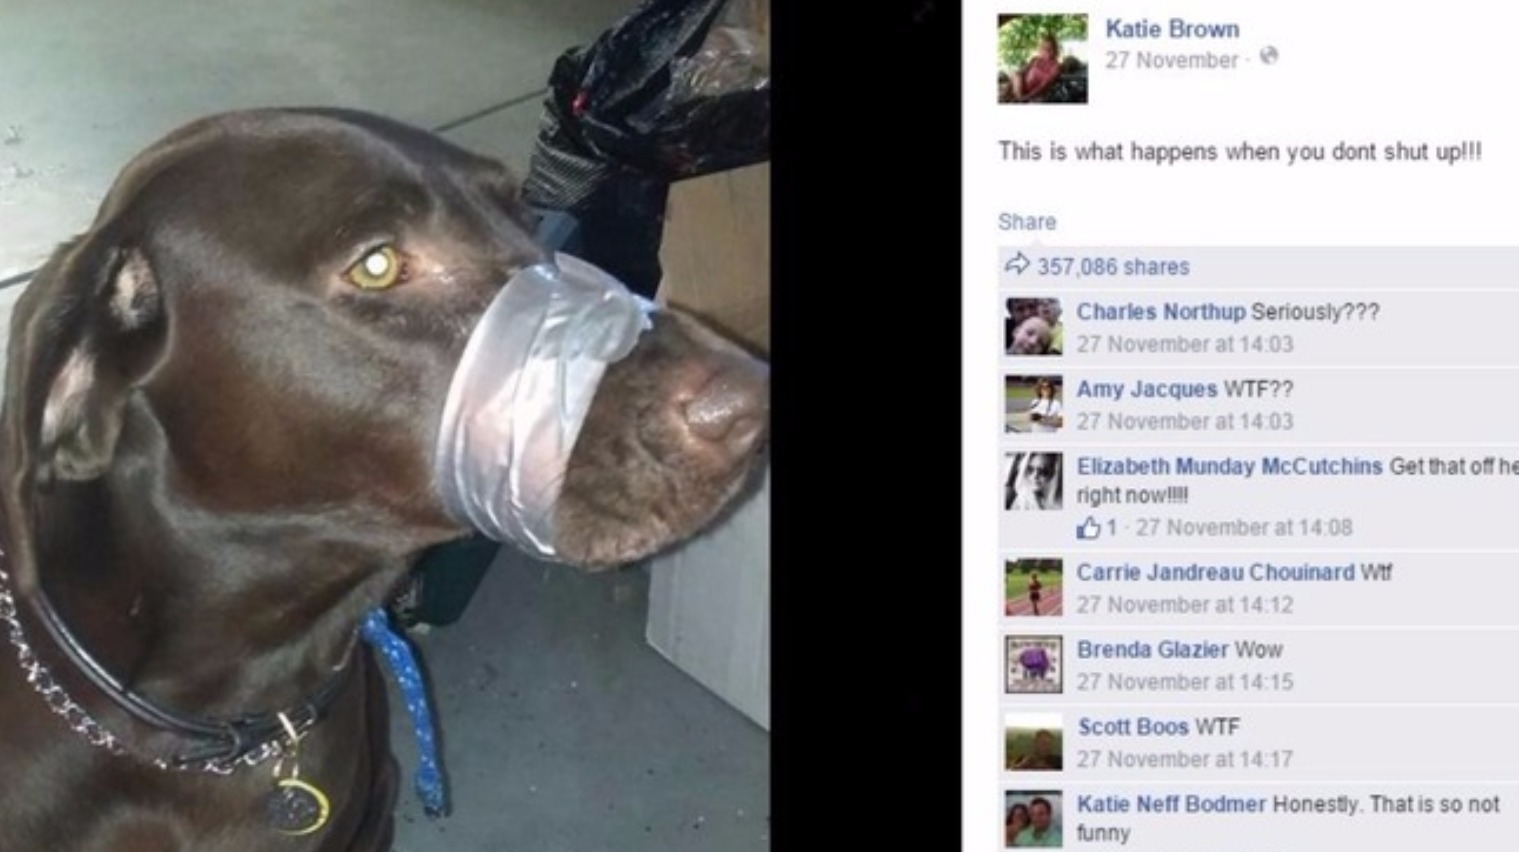 Woman who duct-taped dog's mouth shut tracked down and faces prison